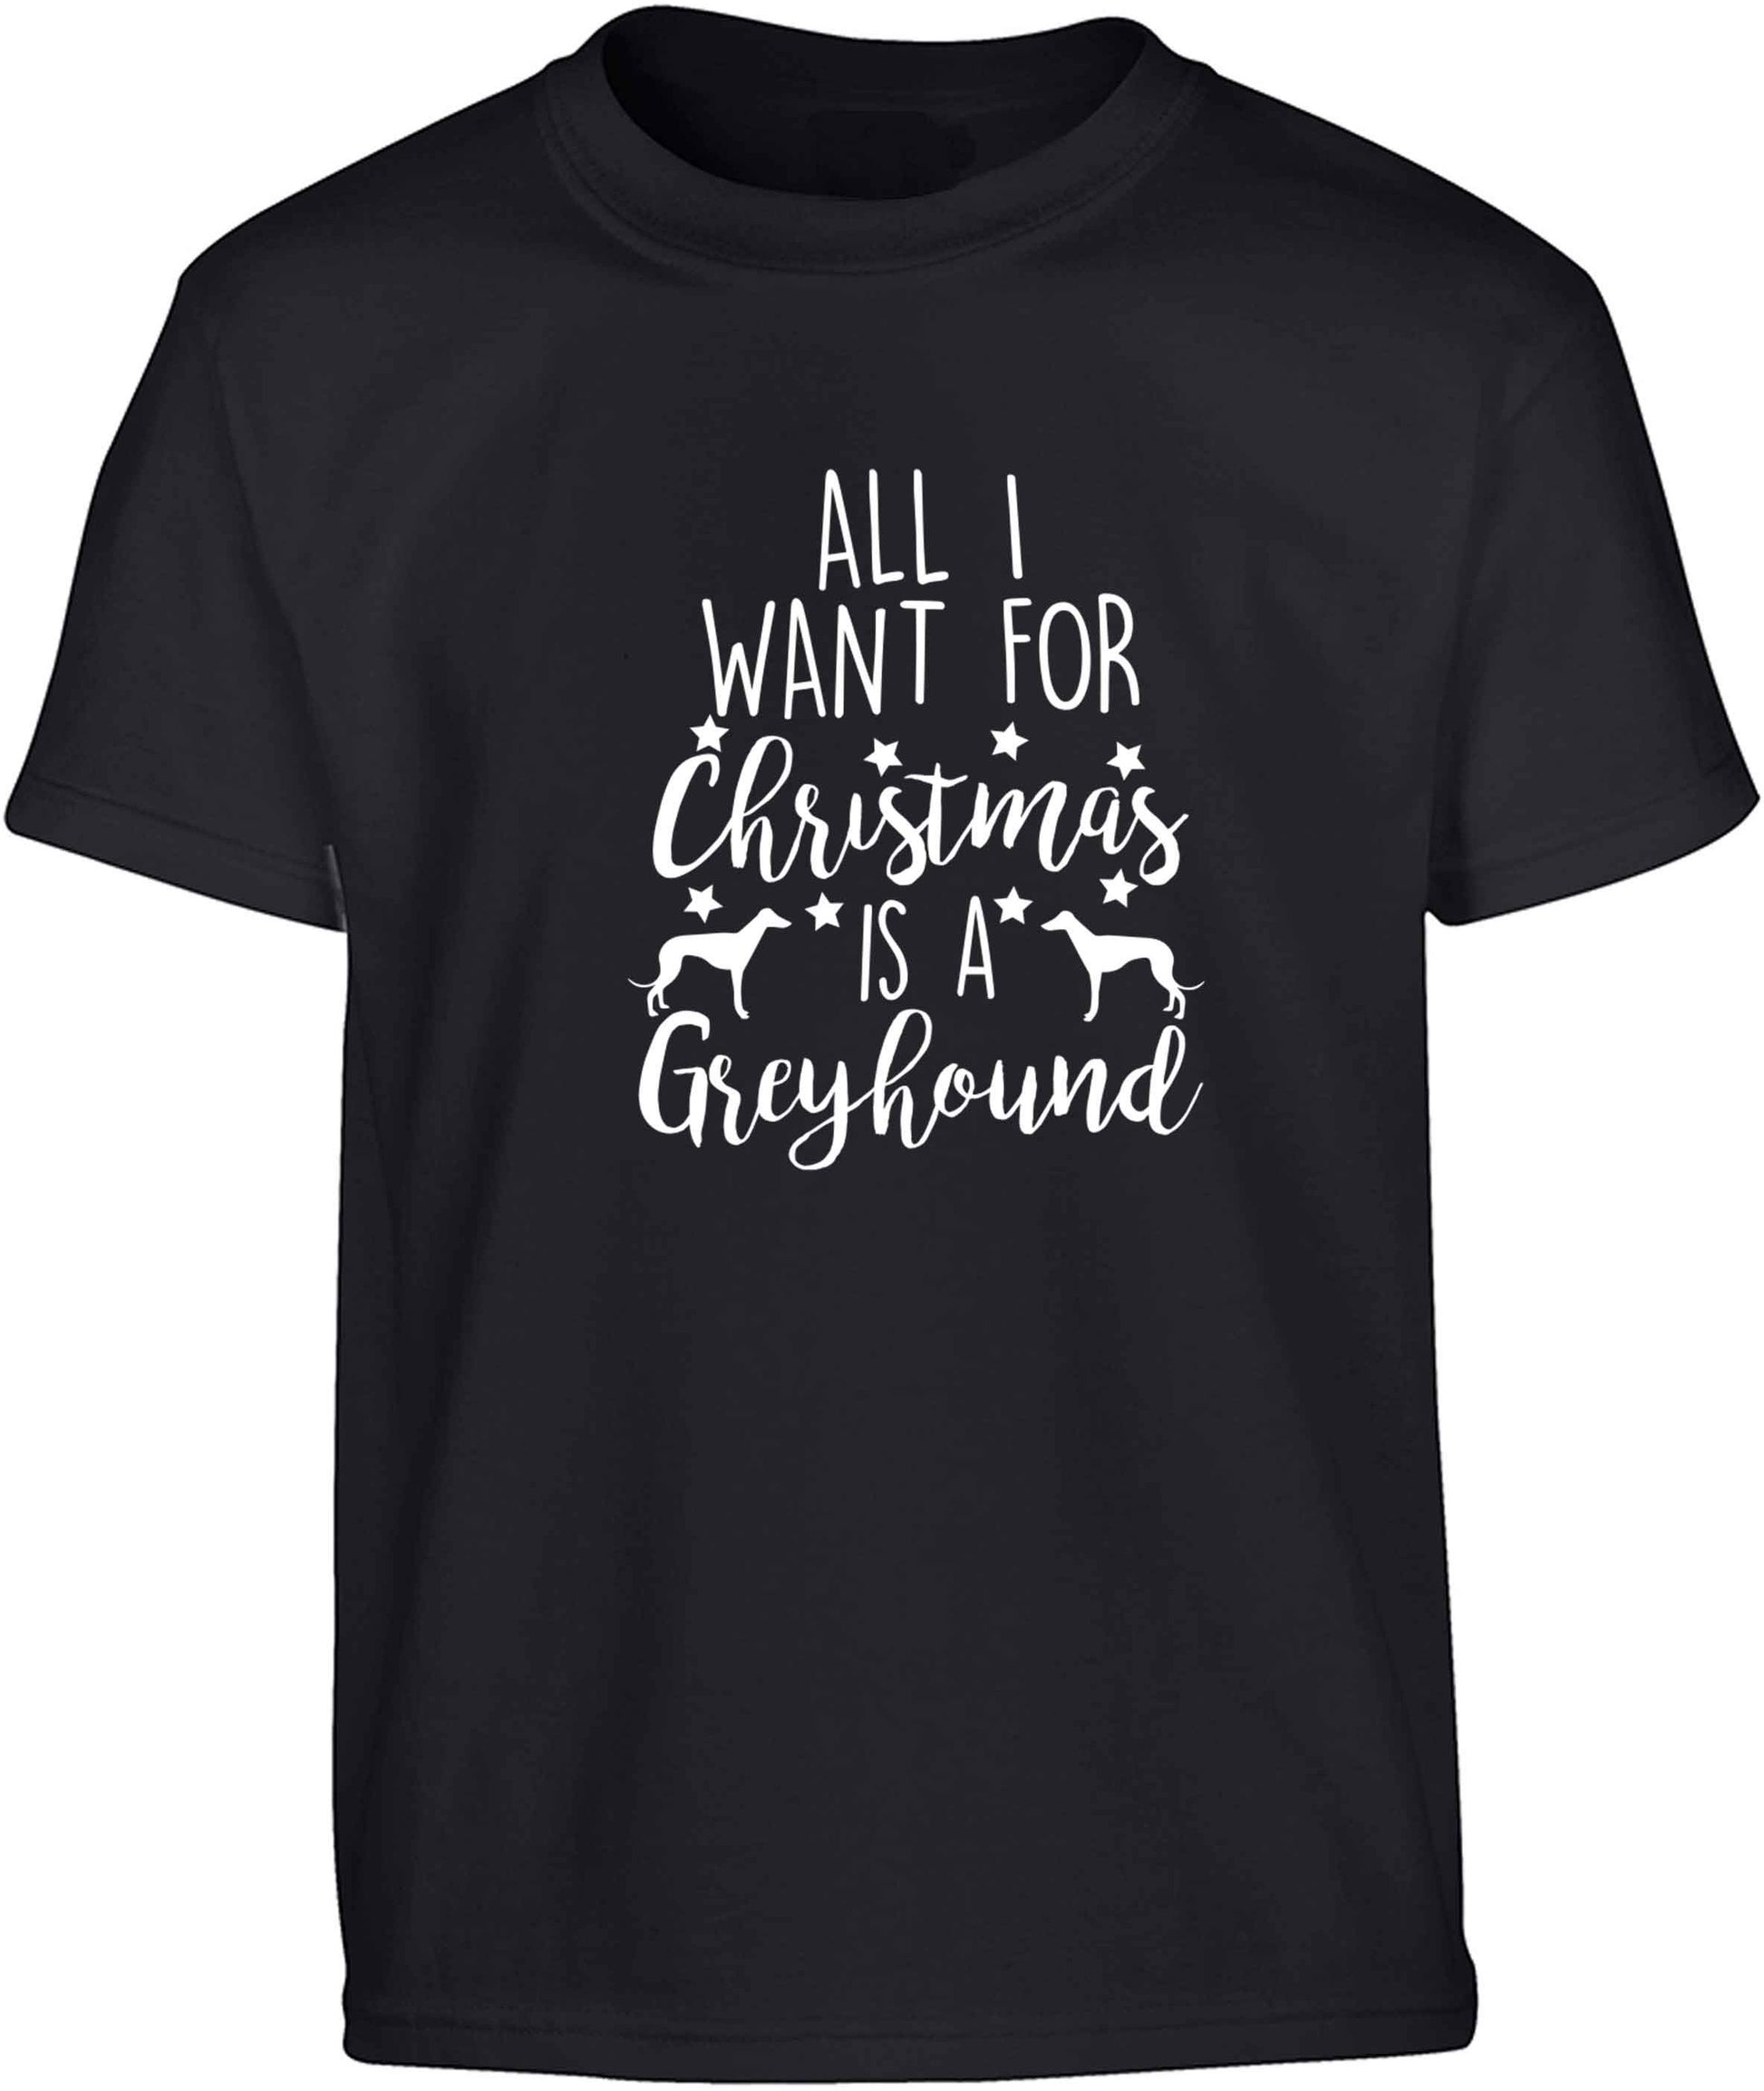 All I want for Christmas is a greyhound Children's black Tshirt 12-13 Years